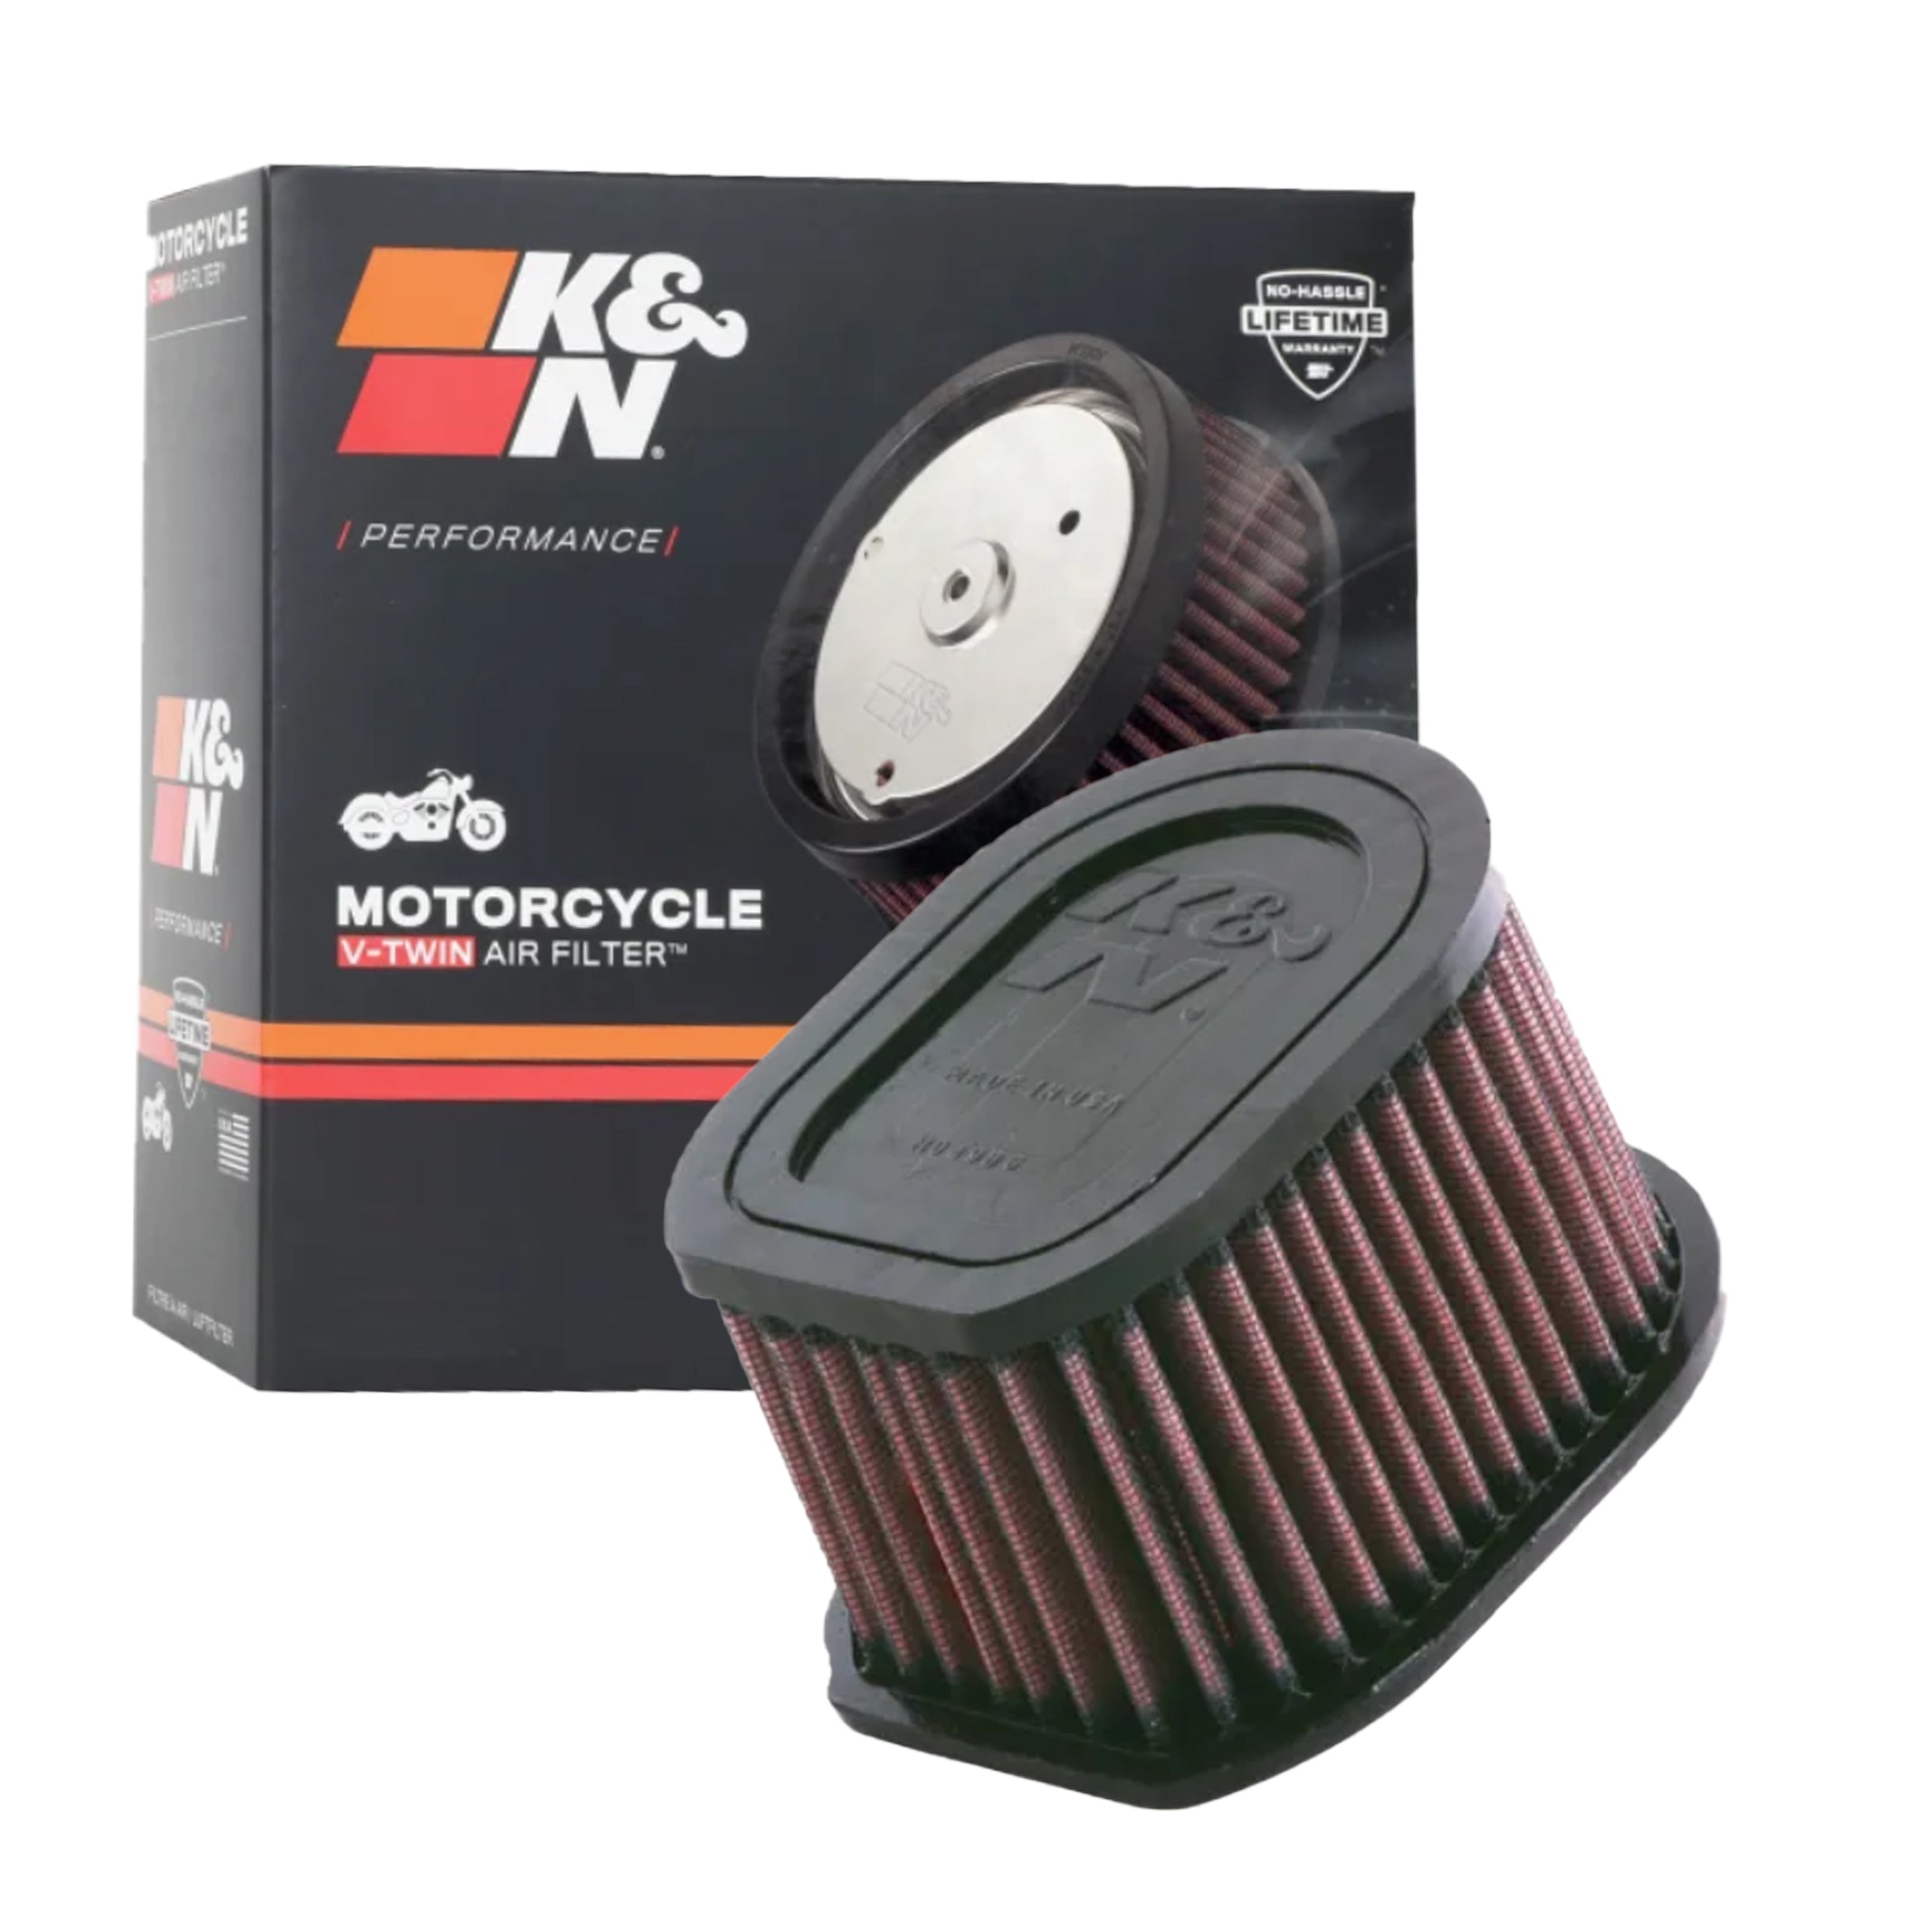 Moto Bike Accessories Motorcycle High Flow Air Filter For Kawasaki Z1000  Z800 Z750 Z750S Element Intake Cleaner Modified Parts - AliExpress